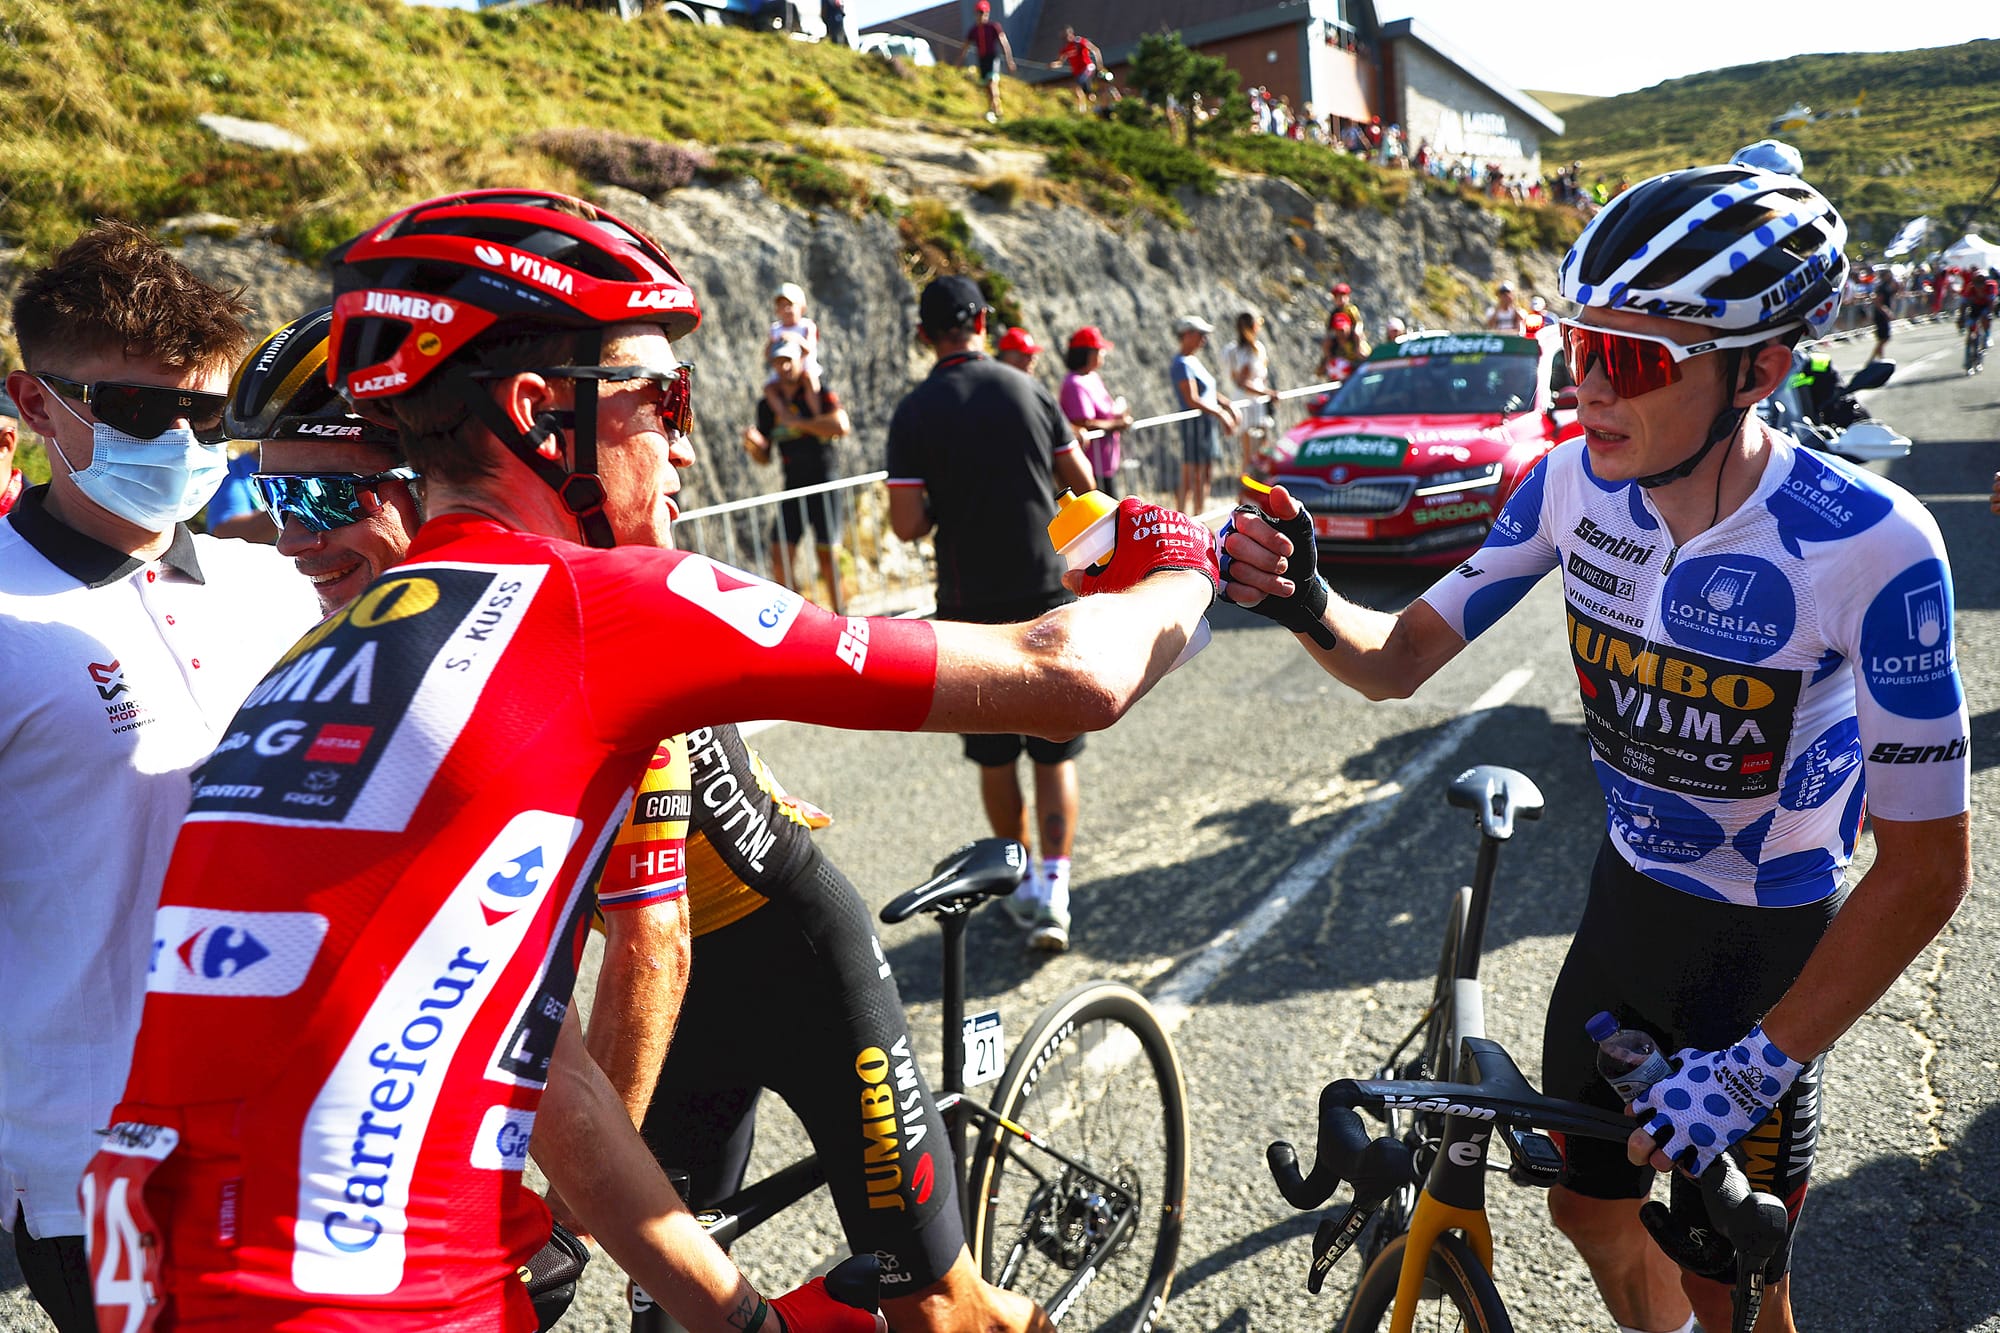 Riders celebrate at the end of a Vuelta a Espana stage. Witness scenes like these at the Vuelta a Espana 2024 with Team Visma Lease a Bike